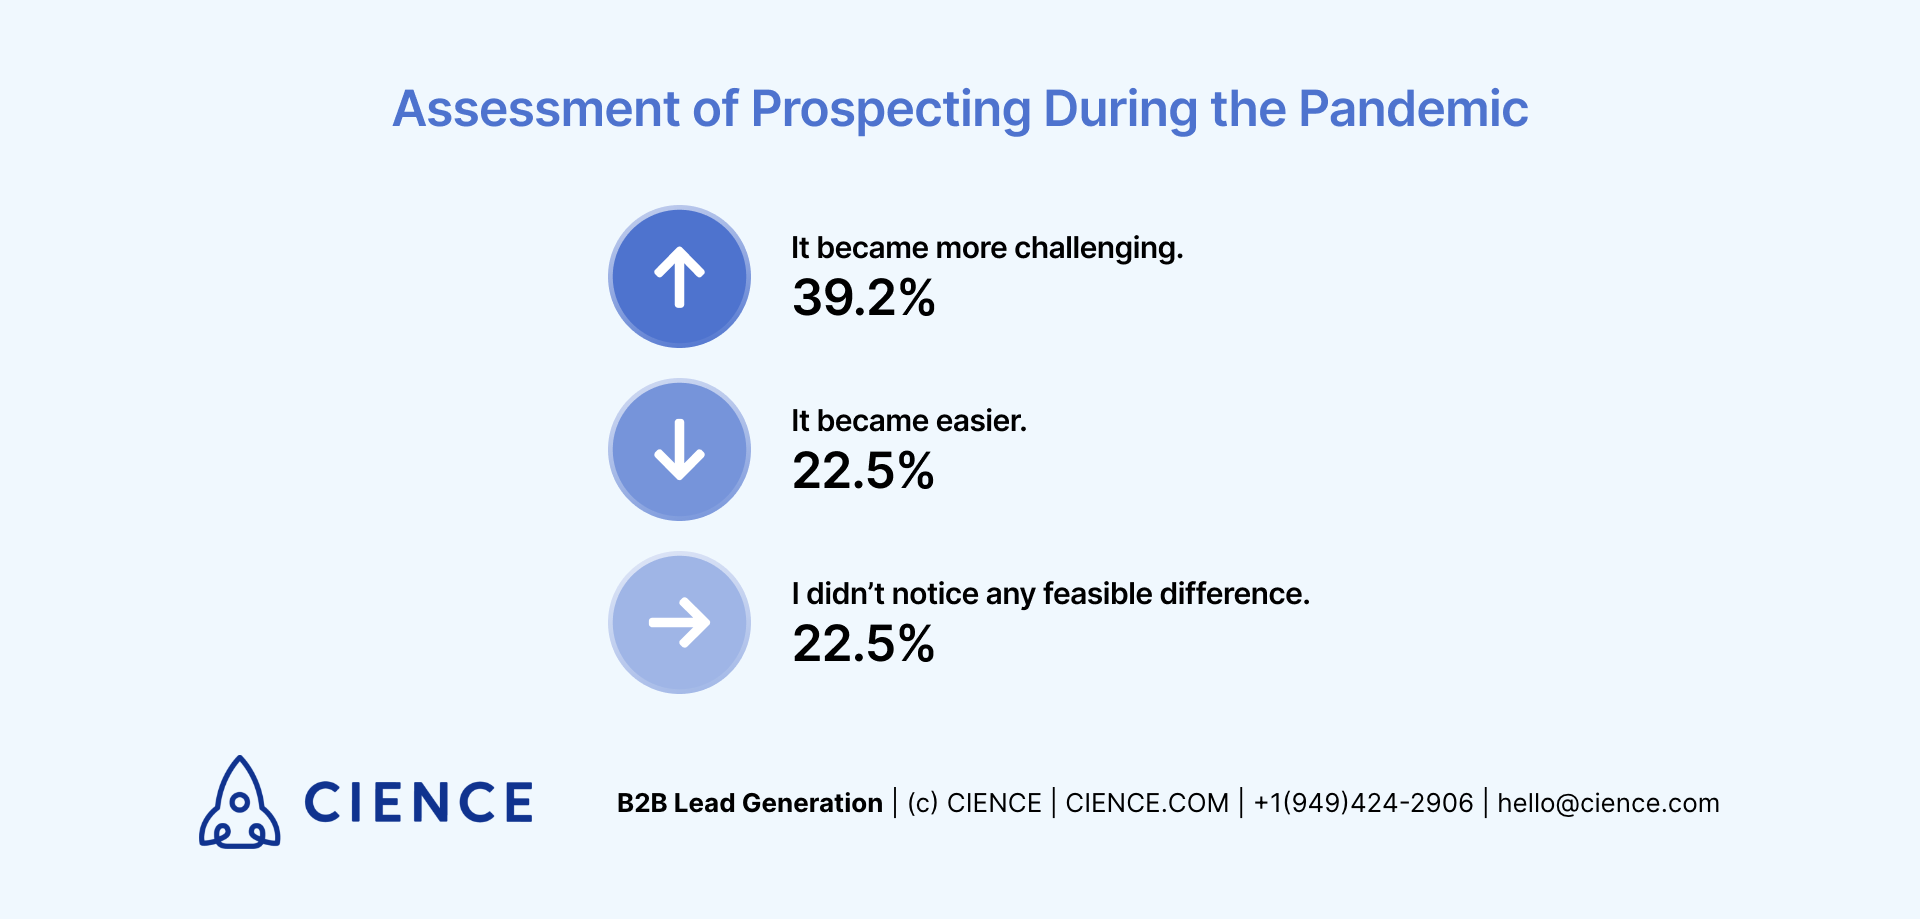 Assessment of Prospecting During Pandemic